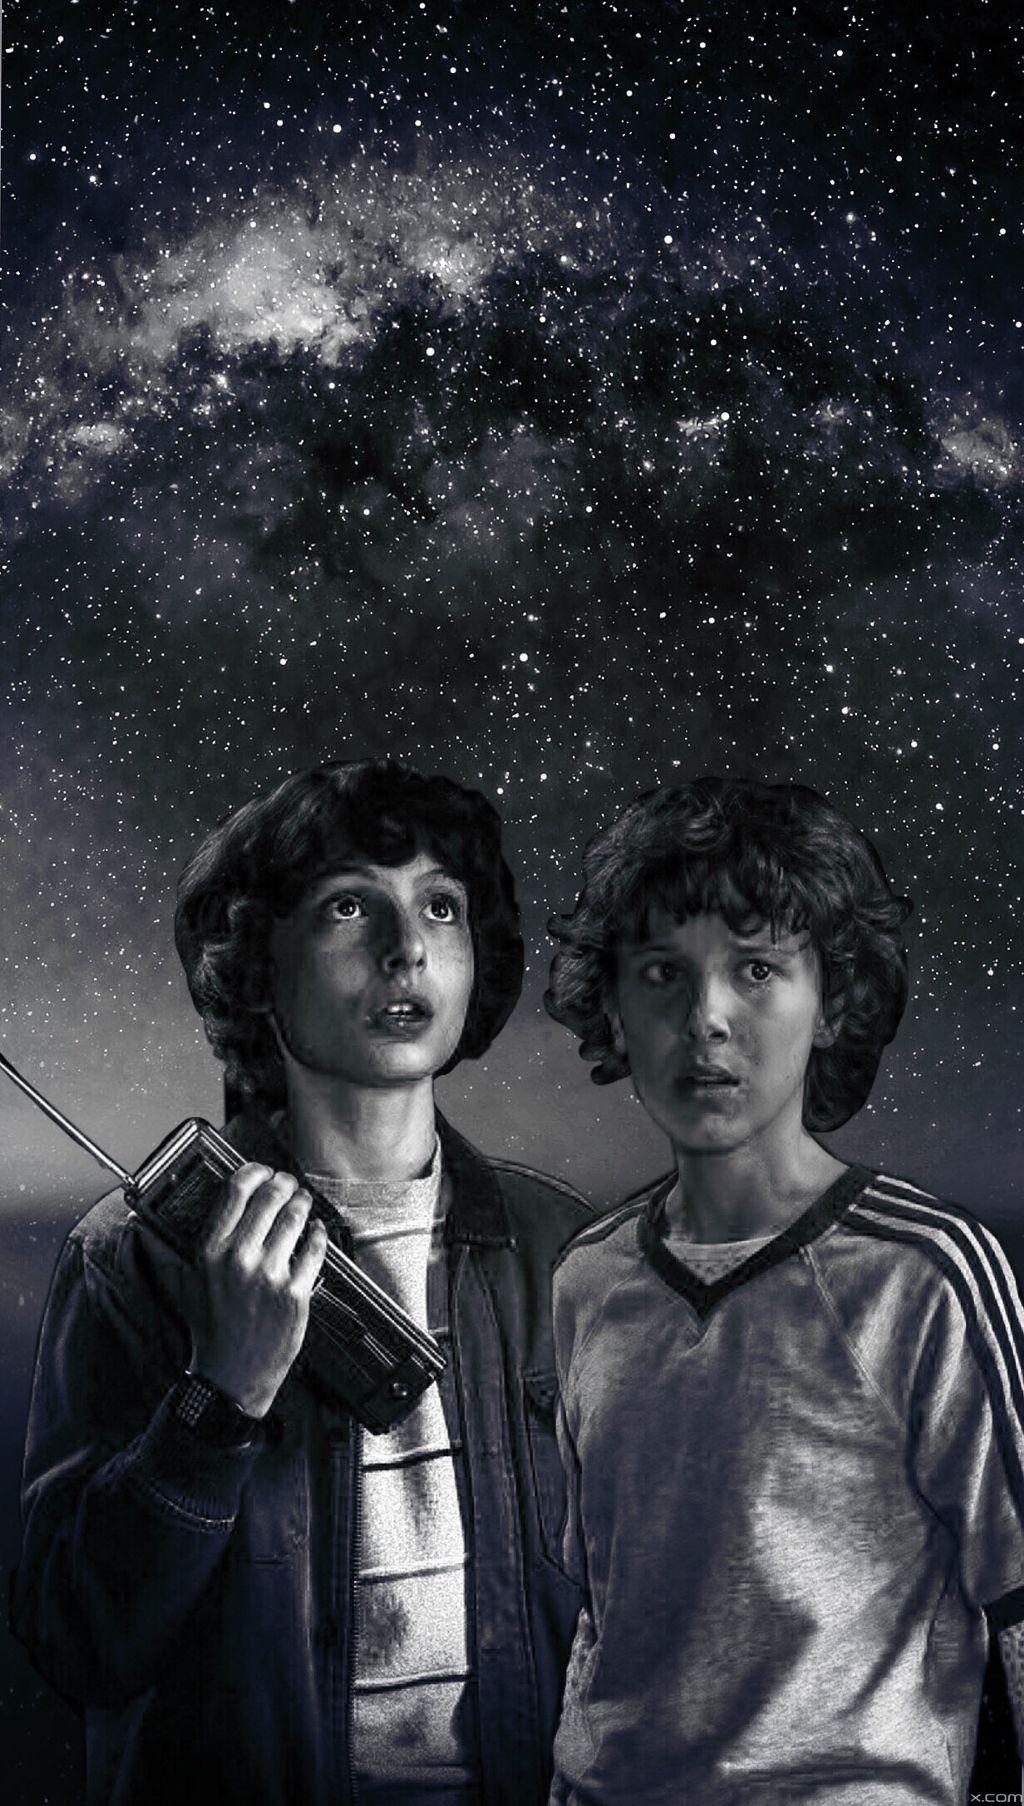 15 Stranger Things Wallpaper Ideas  Max and Eleven  Idea Wallpapers   iPhone WallpapersColor Schemes